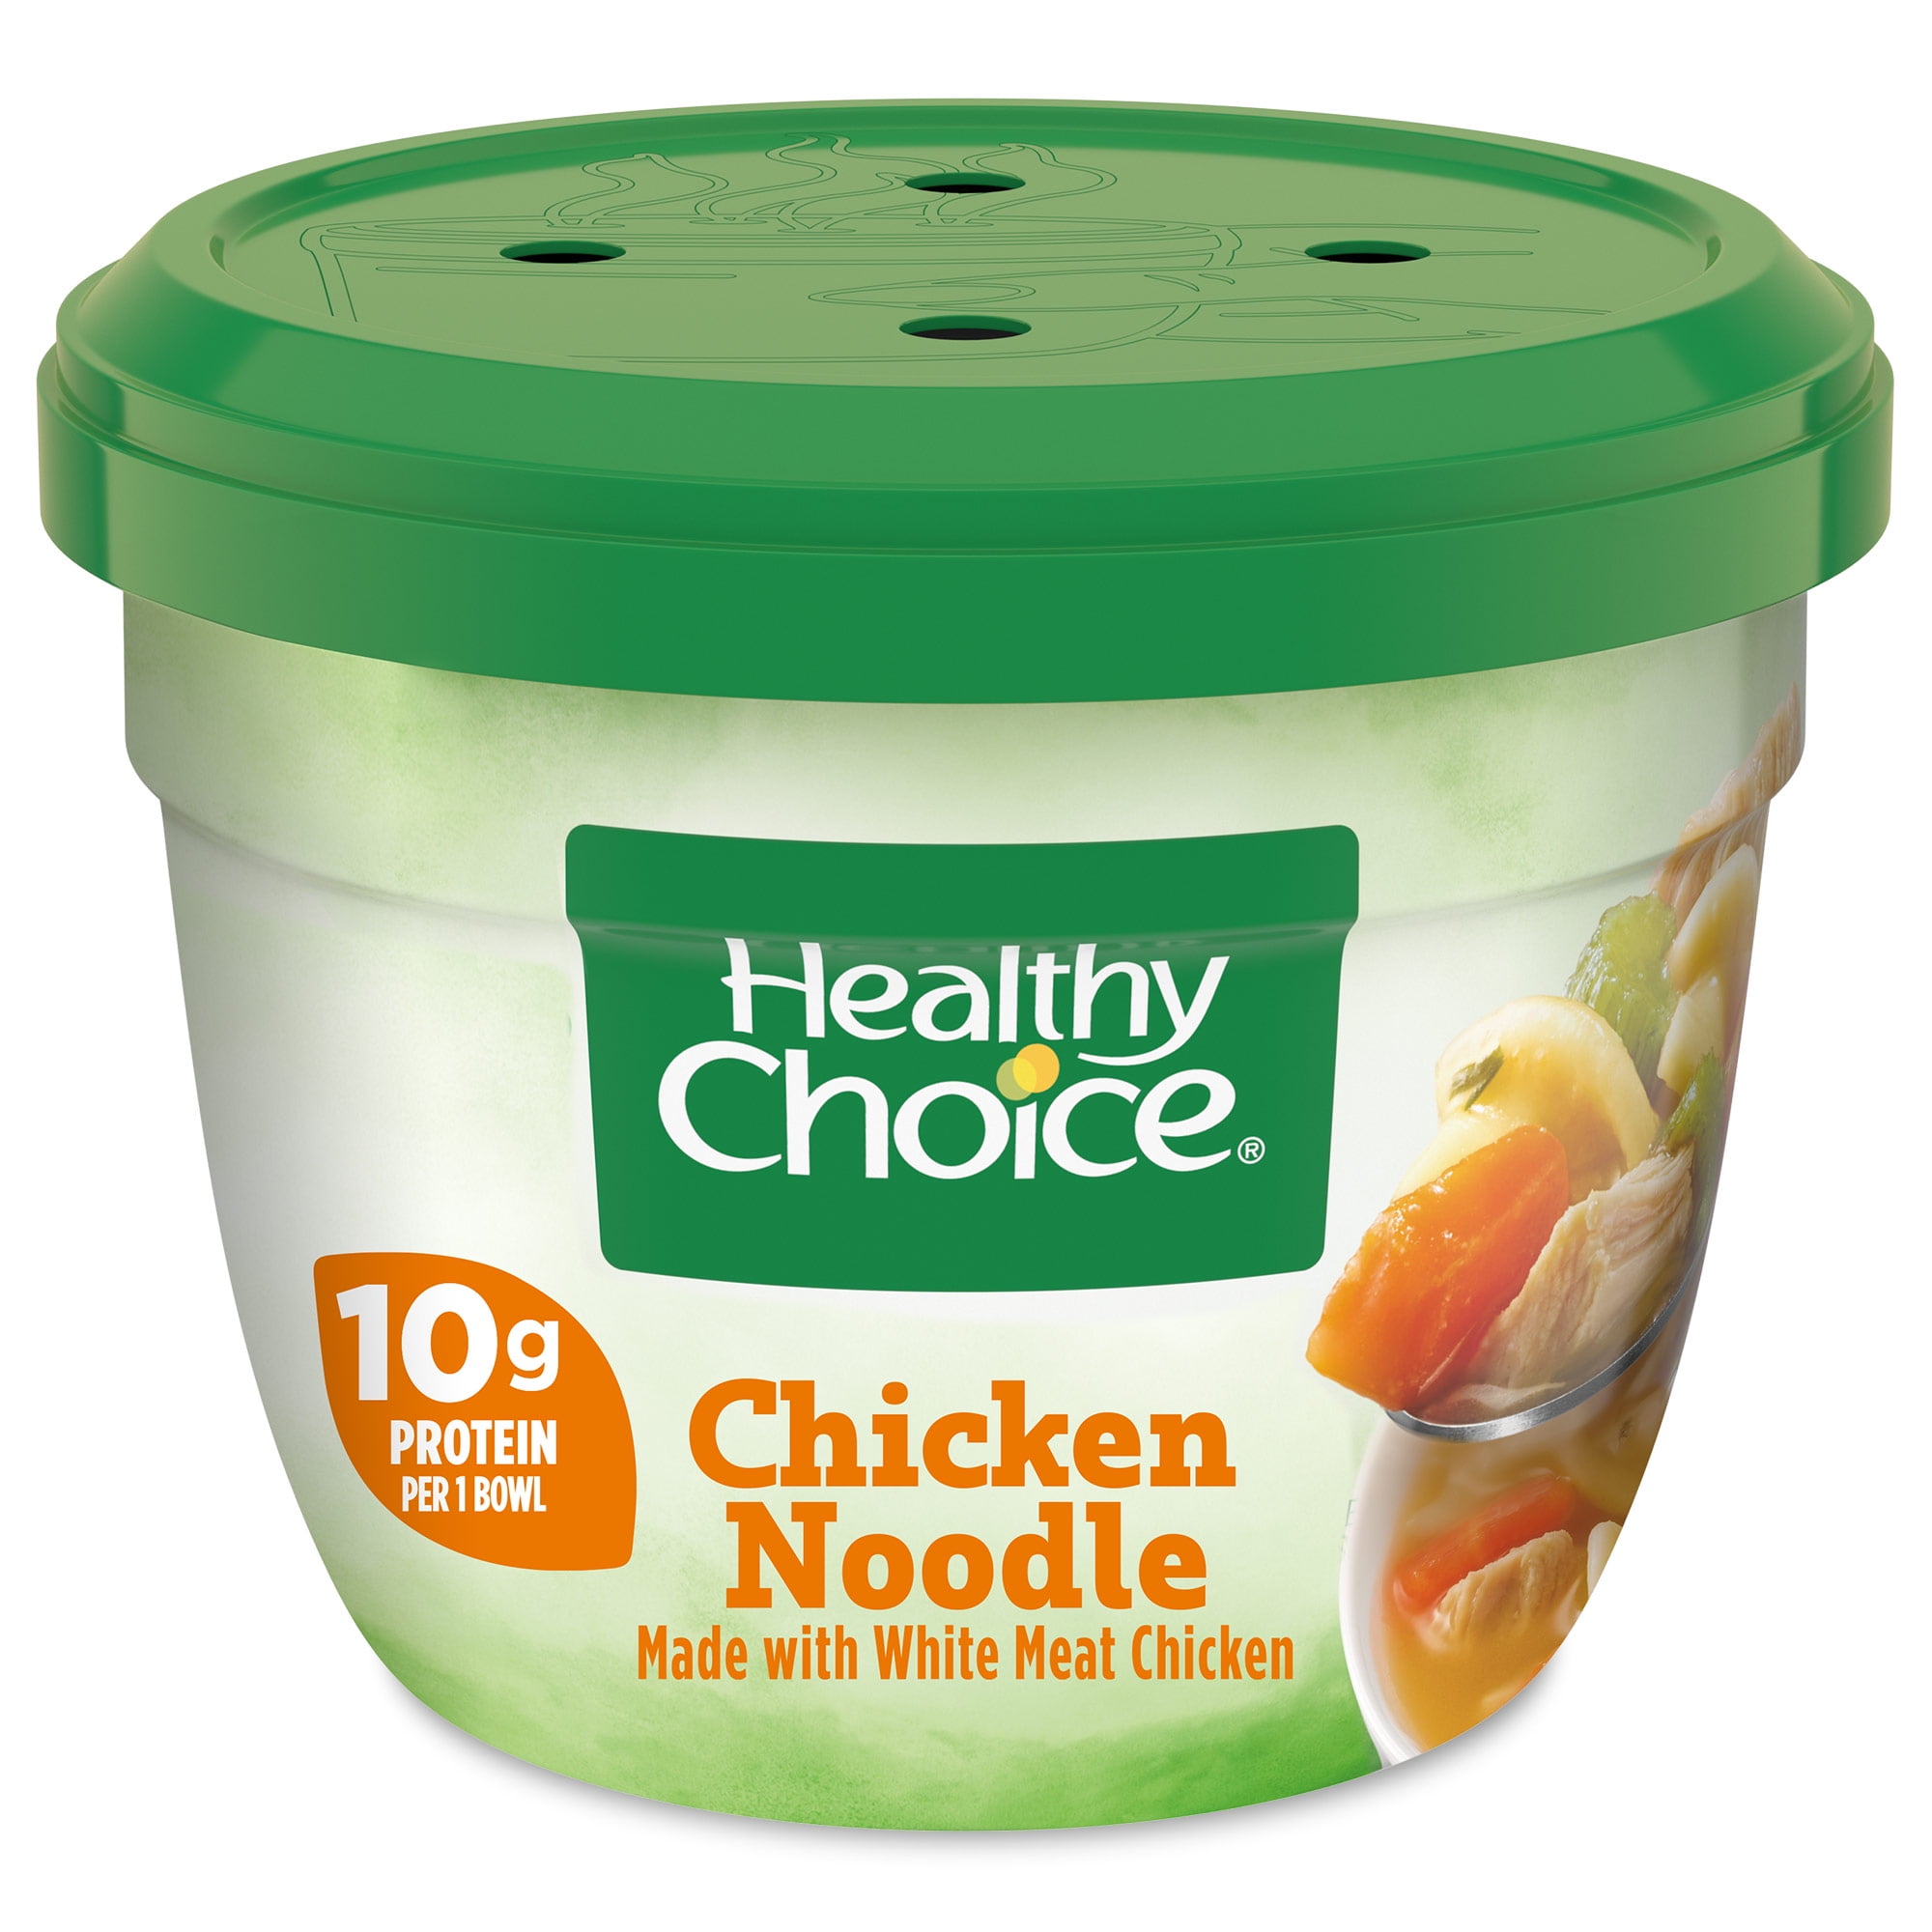 Healthy Choice Chicken Noodle Soup, Microwave Bowl, 14 oz.